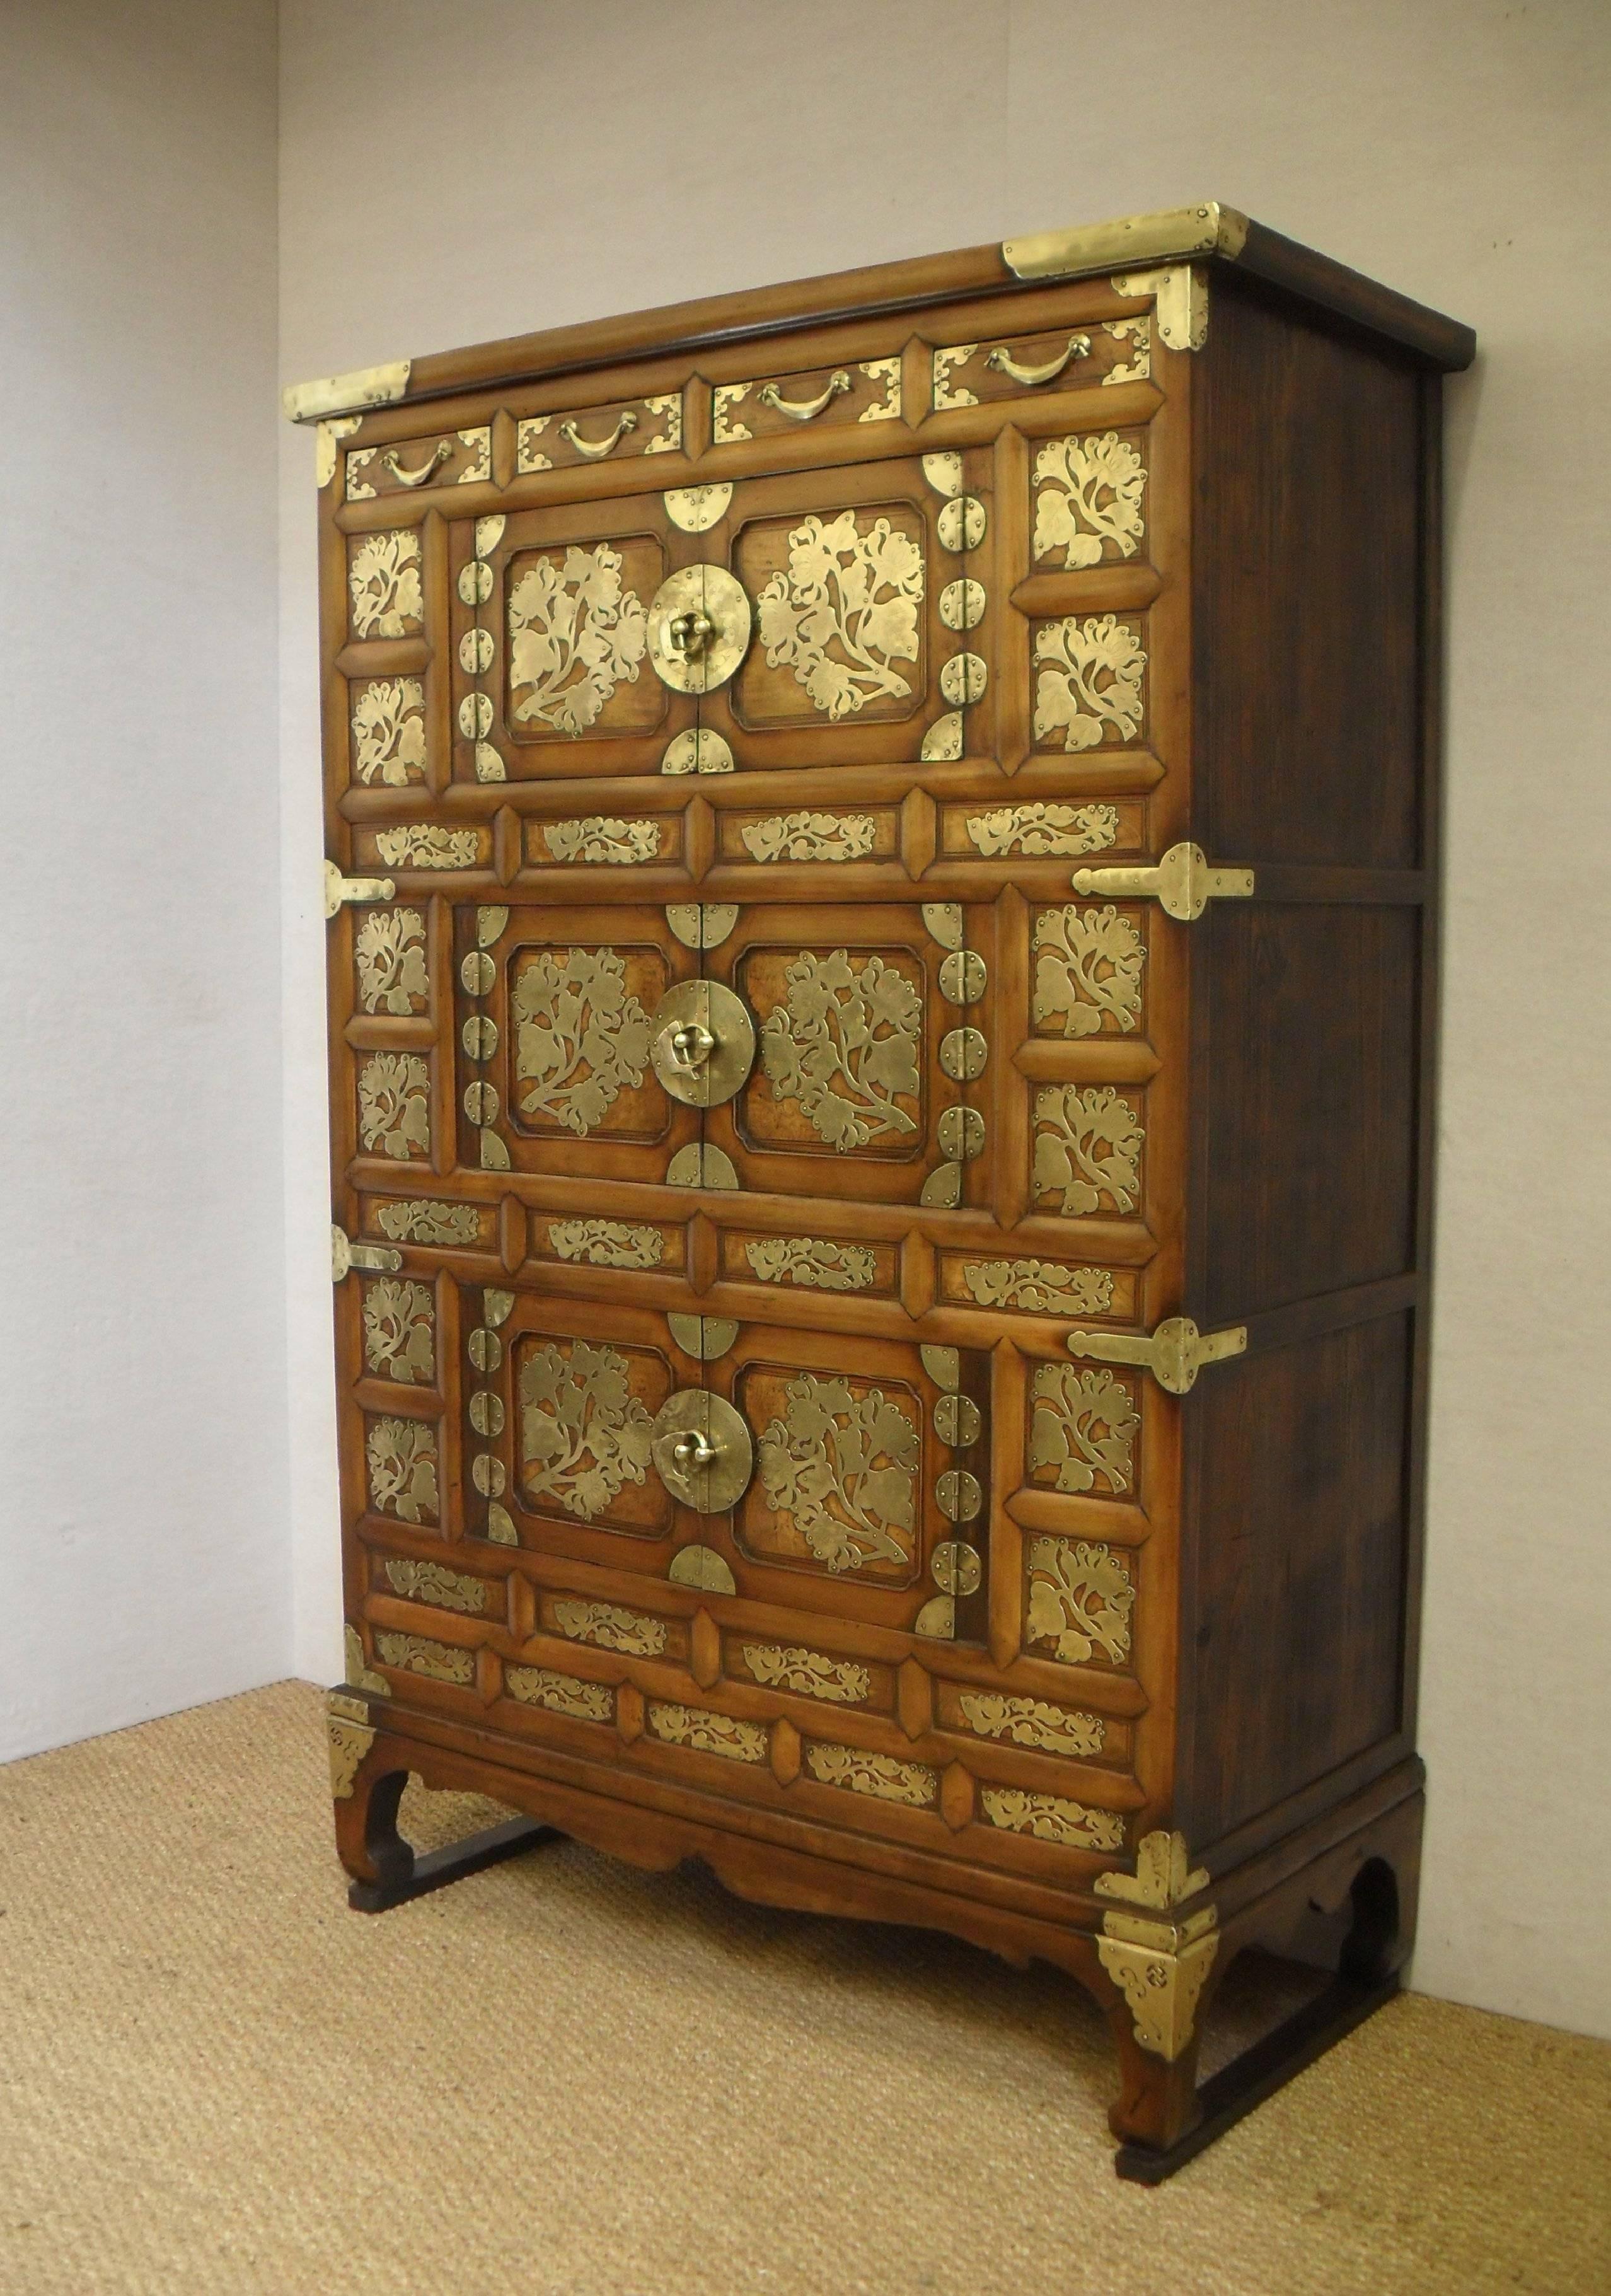 An exceptional quality and highly decorated Korean Joseon Dynasty three-tier sam-cheung-jang Tansu. The Tansu has pine panelled sides and back, with a pear wood frame and burr elm (zelkova) panels to the front with persimmon string inlay. The Tansu